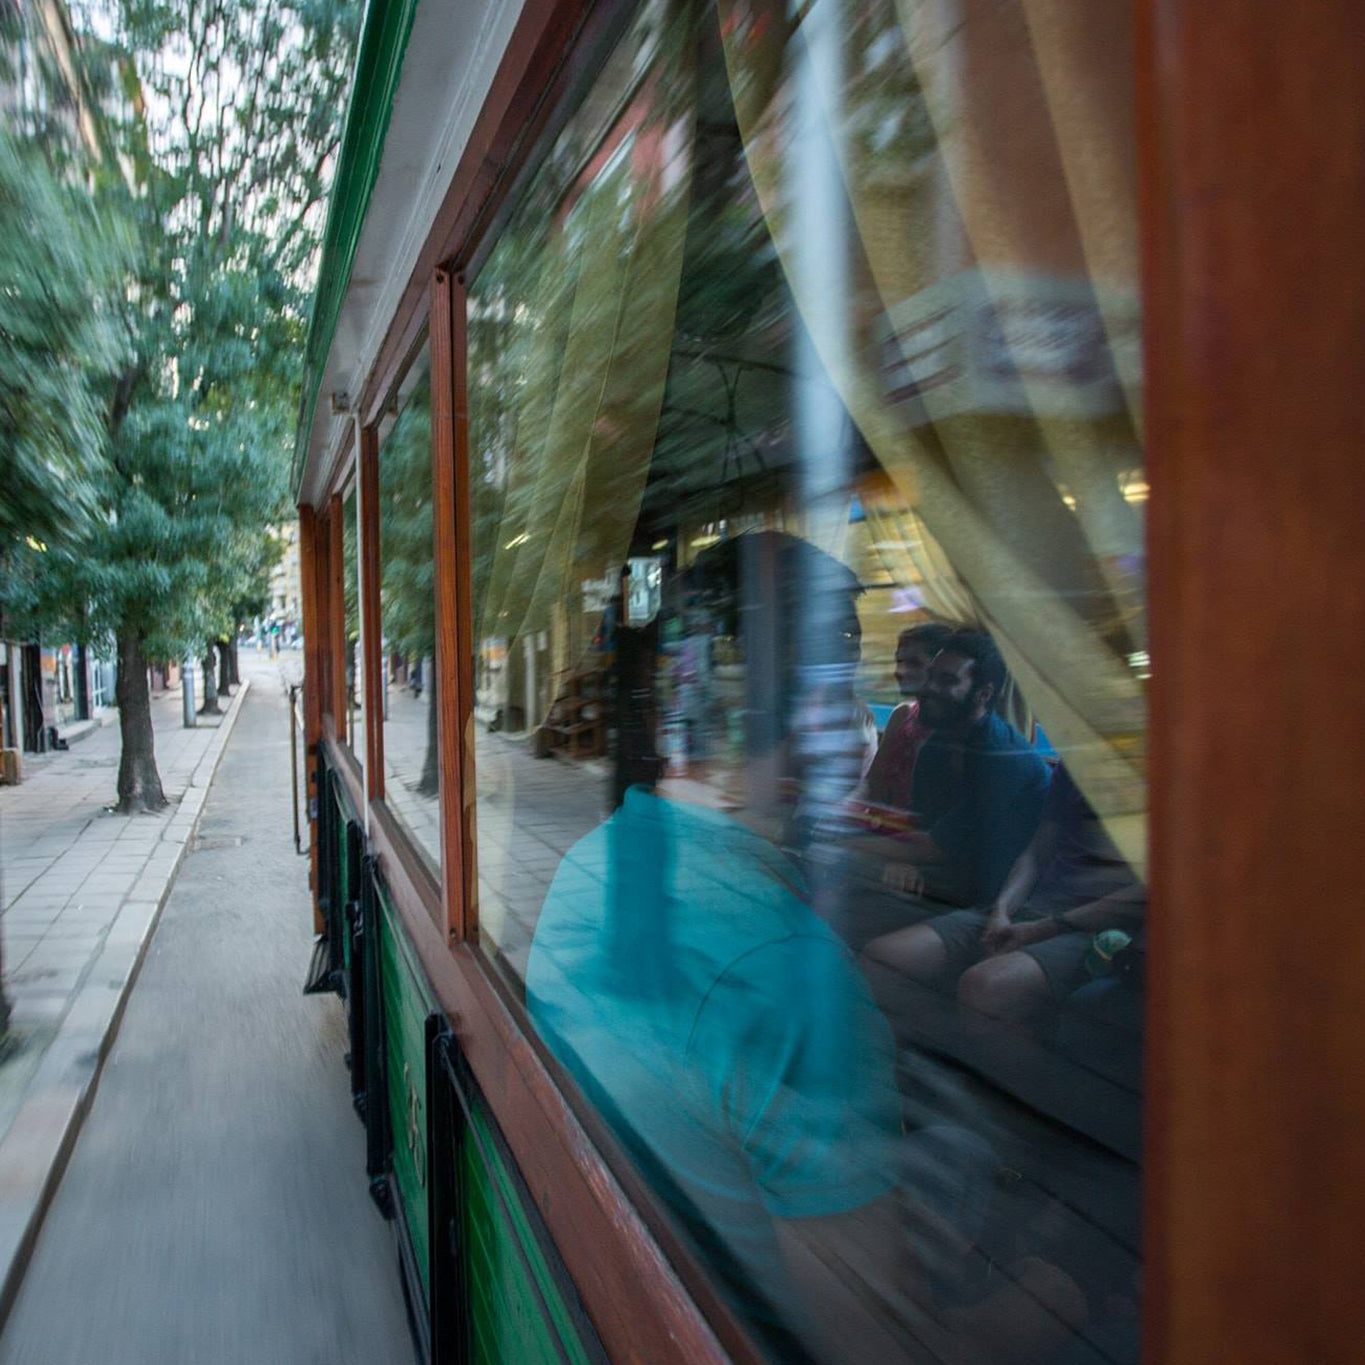 "Go back in time" to the beginning of the 20th century by tram. Private party for up to 20 people. Sofia